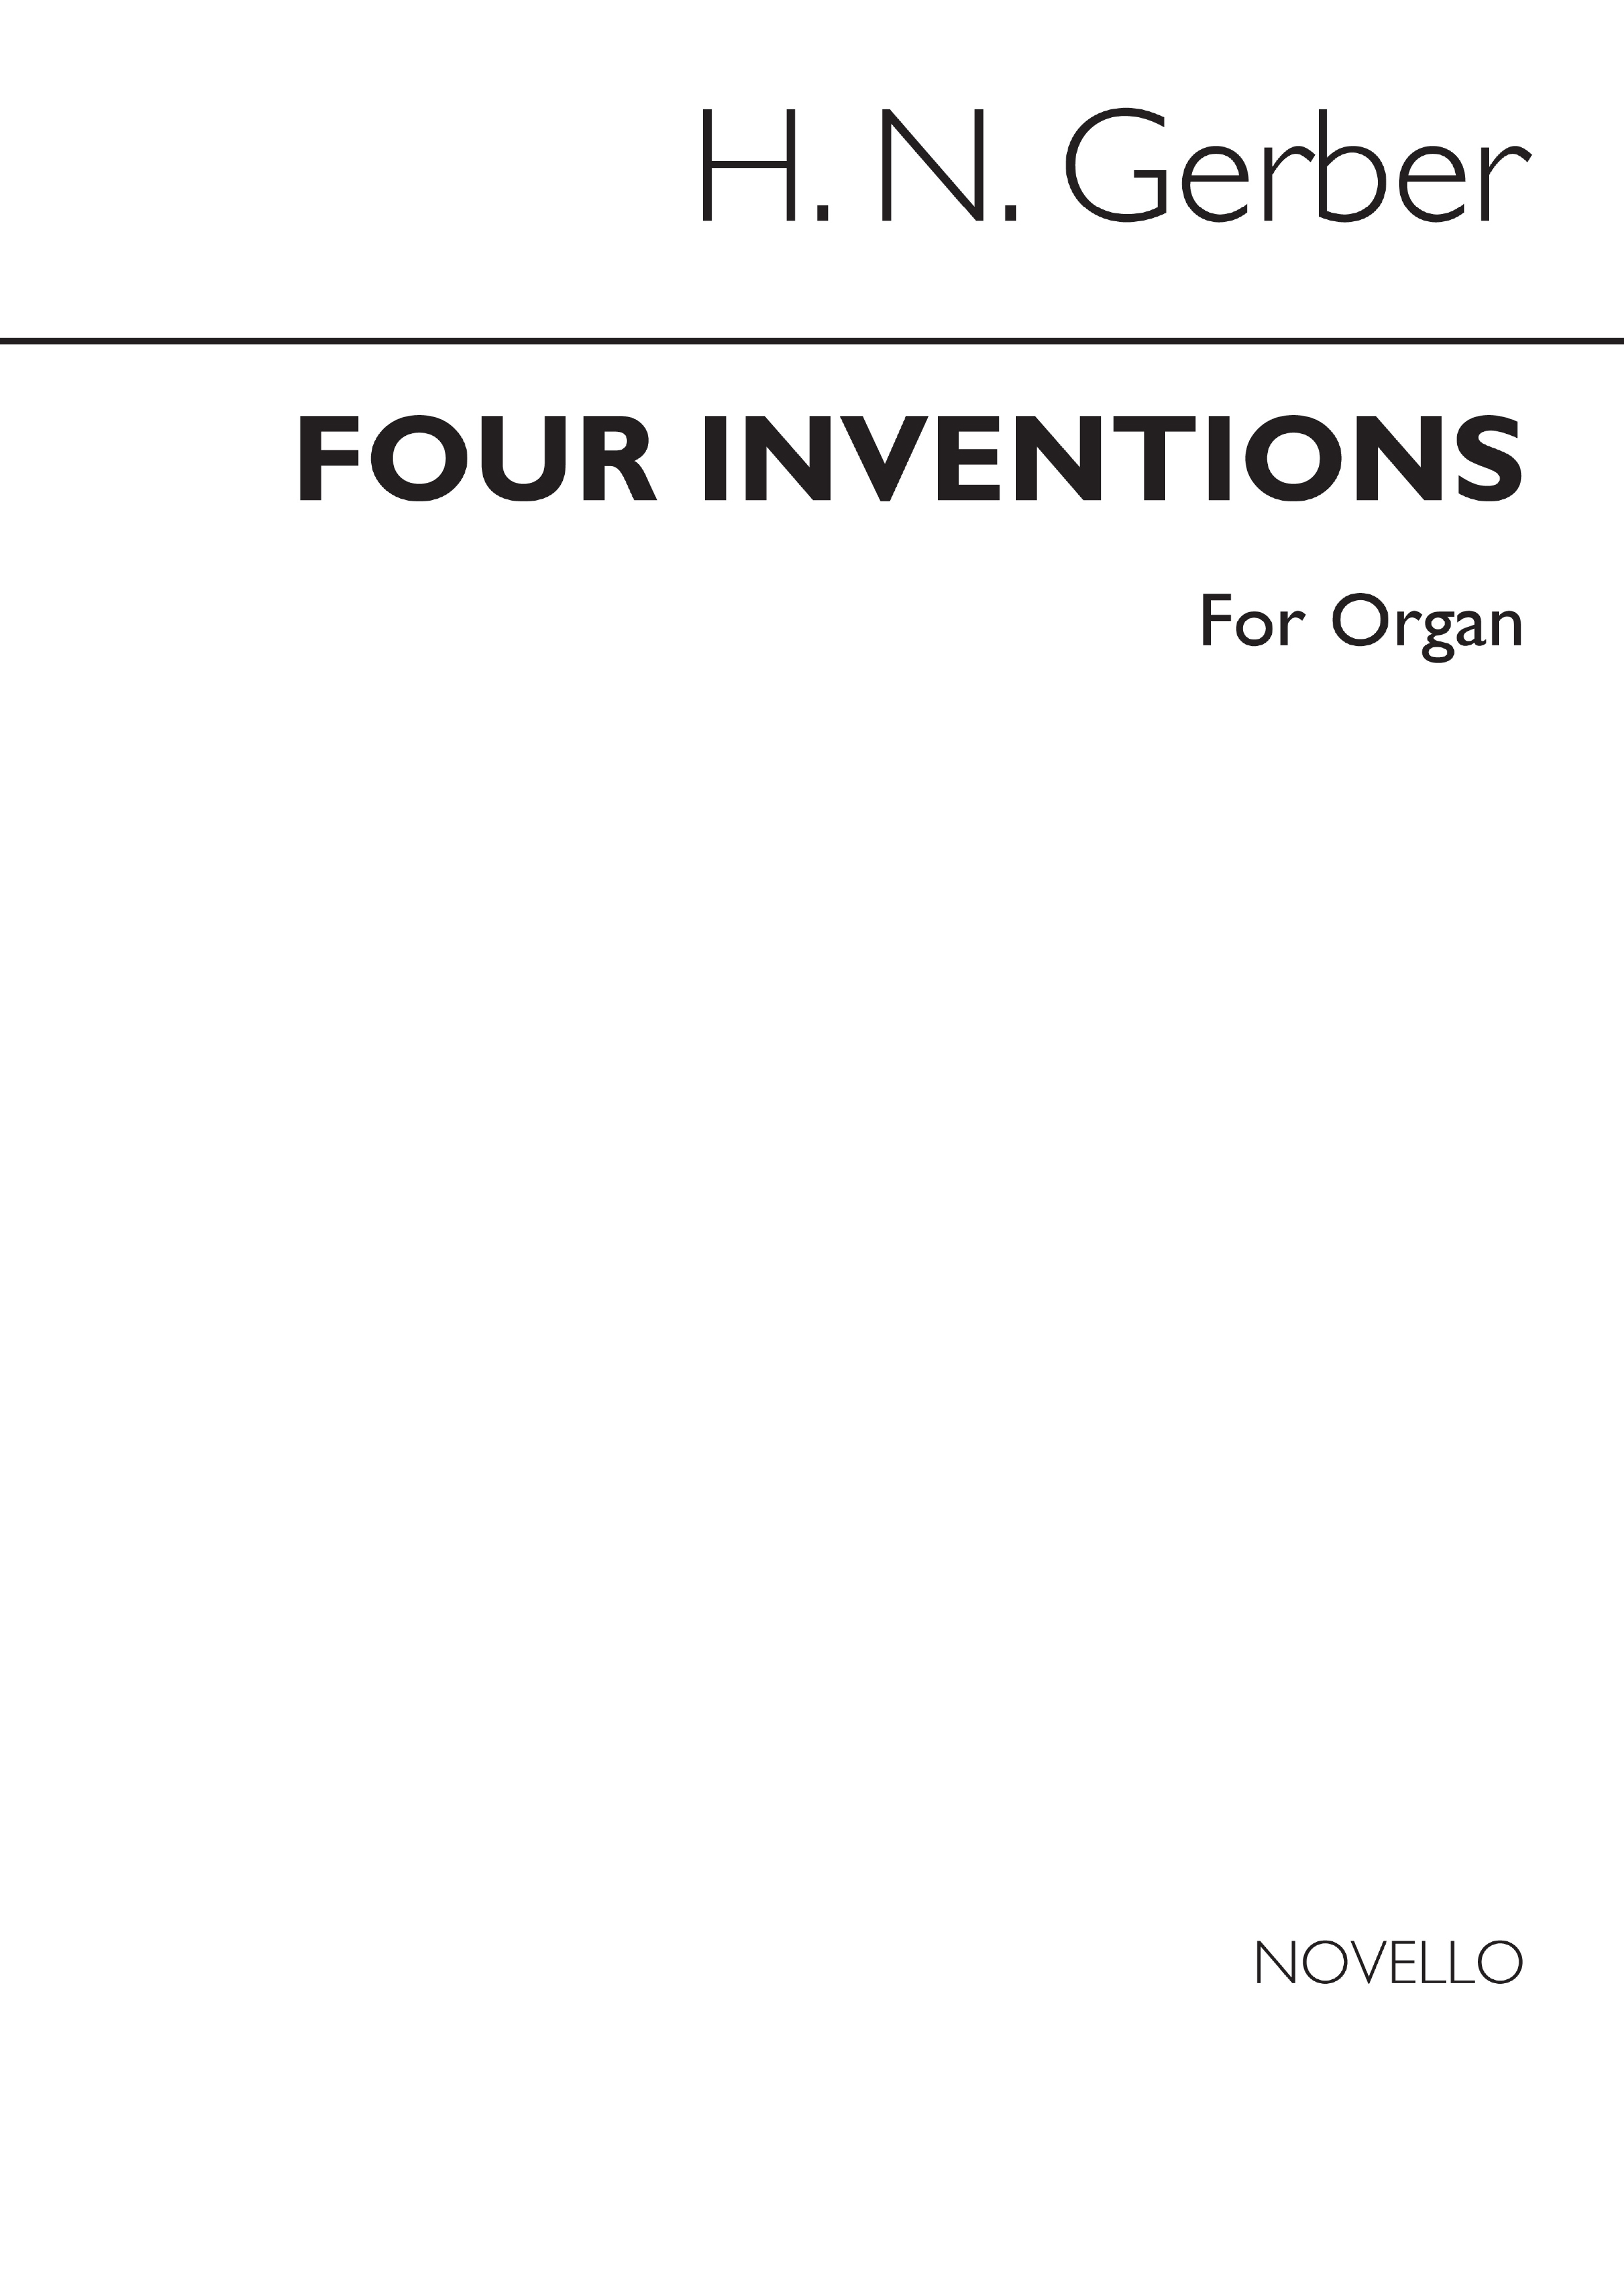 Heinrich Nicolaus Gerber: Four Inventions For Organ